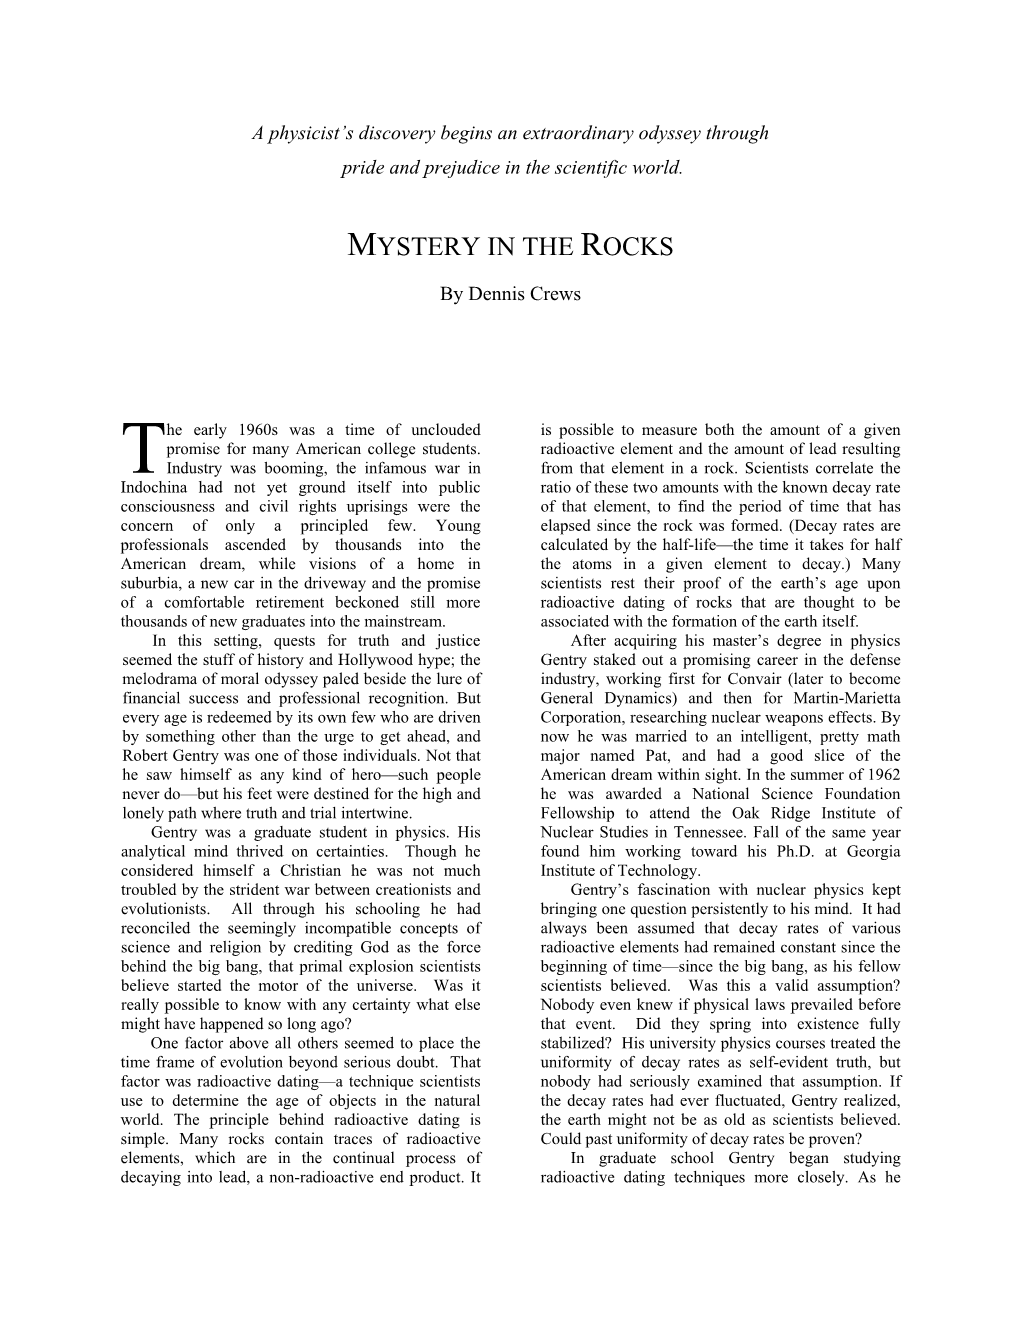 Mystery in the Rocks-Printout